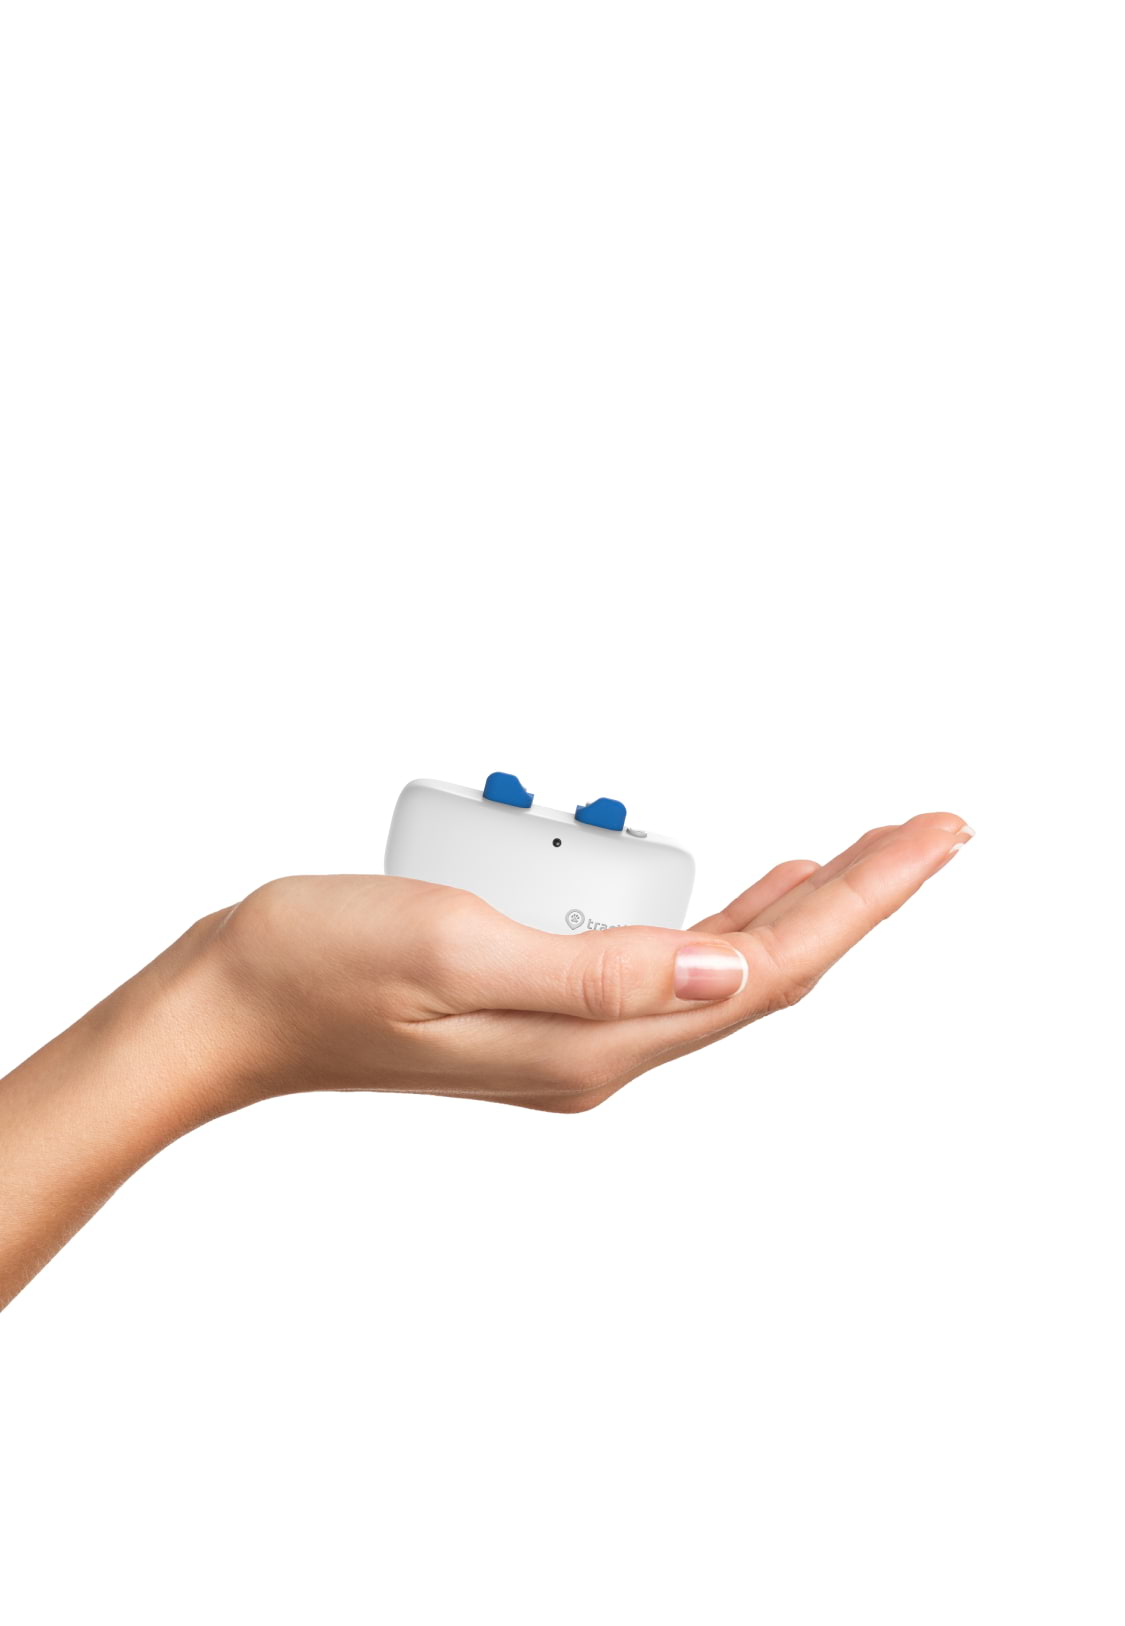 The Tractive GPS tracker that easily fits in a hand.